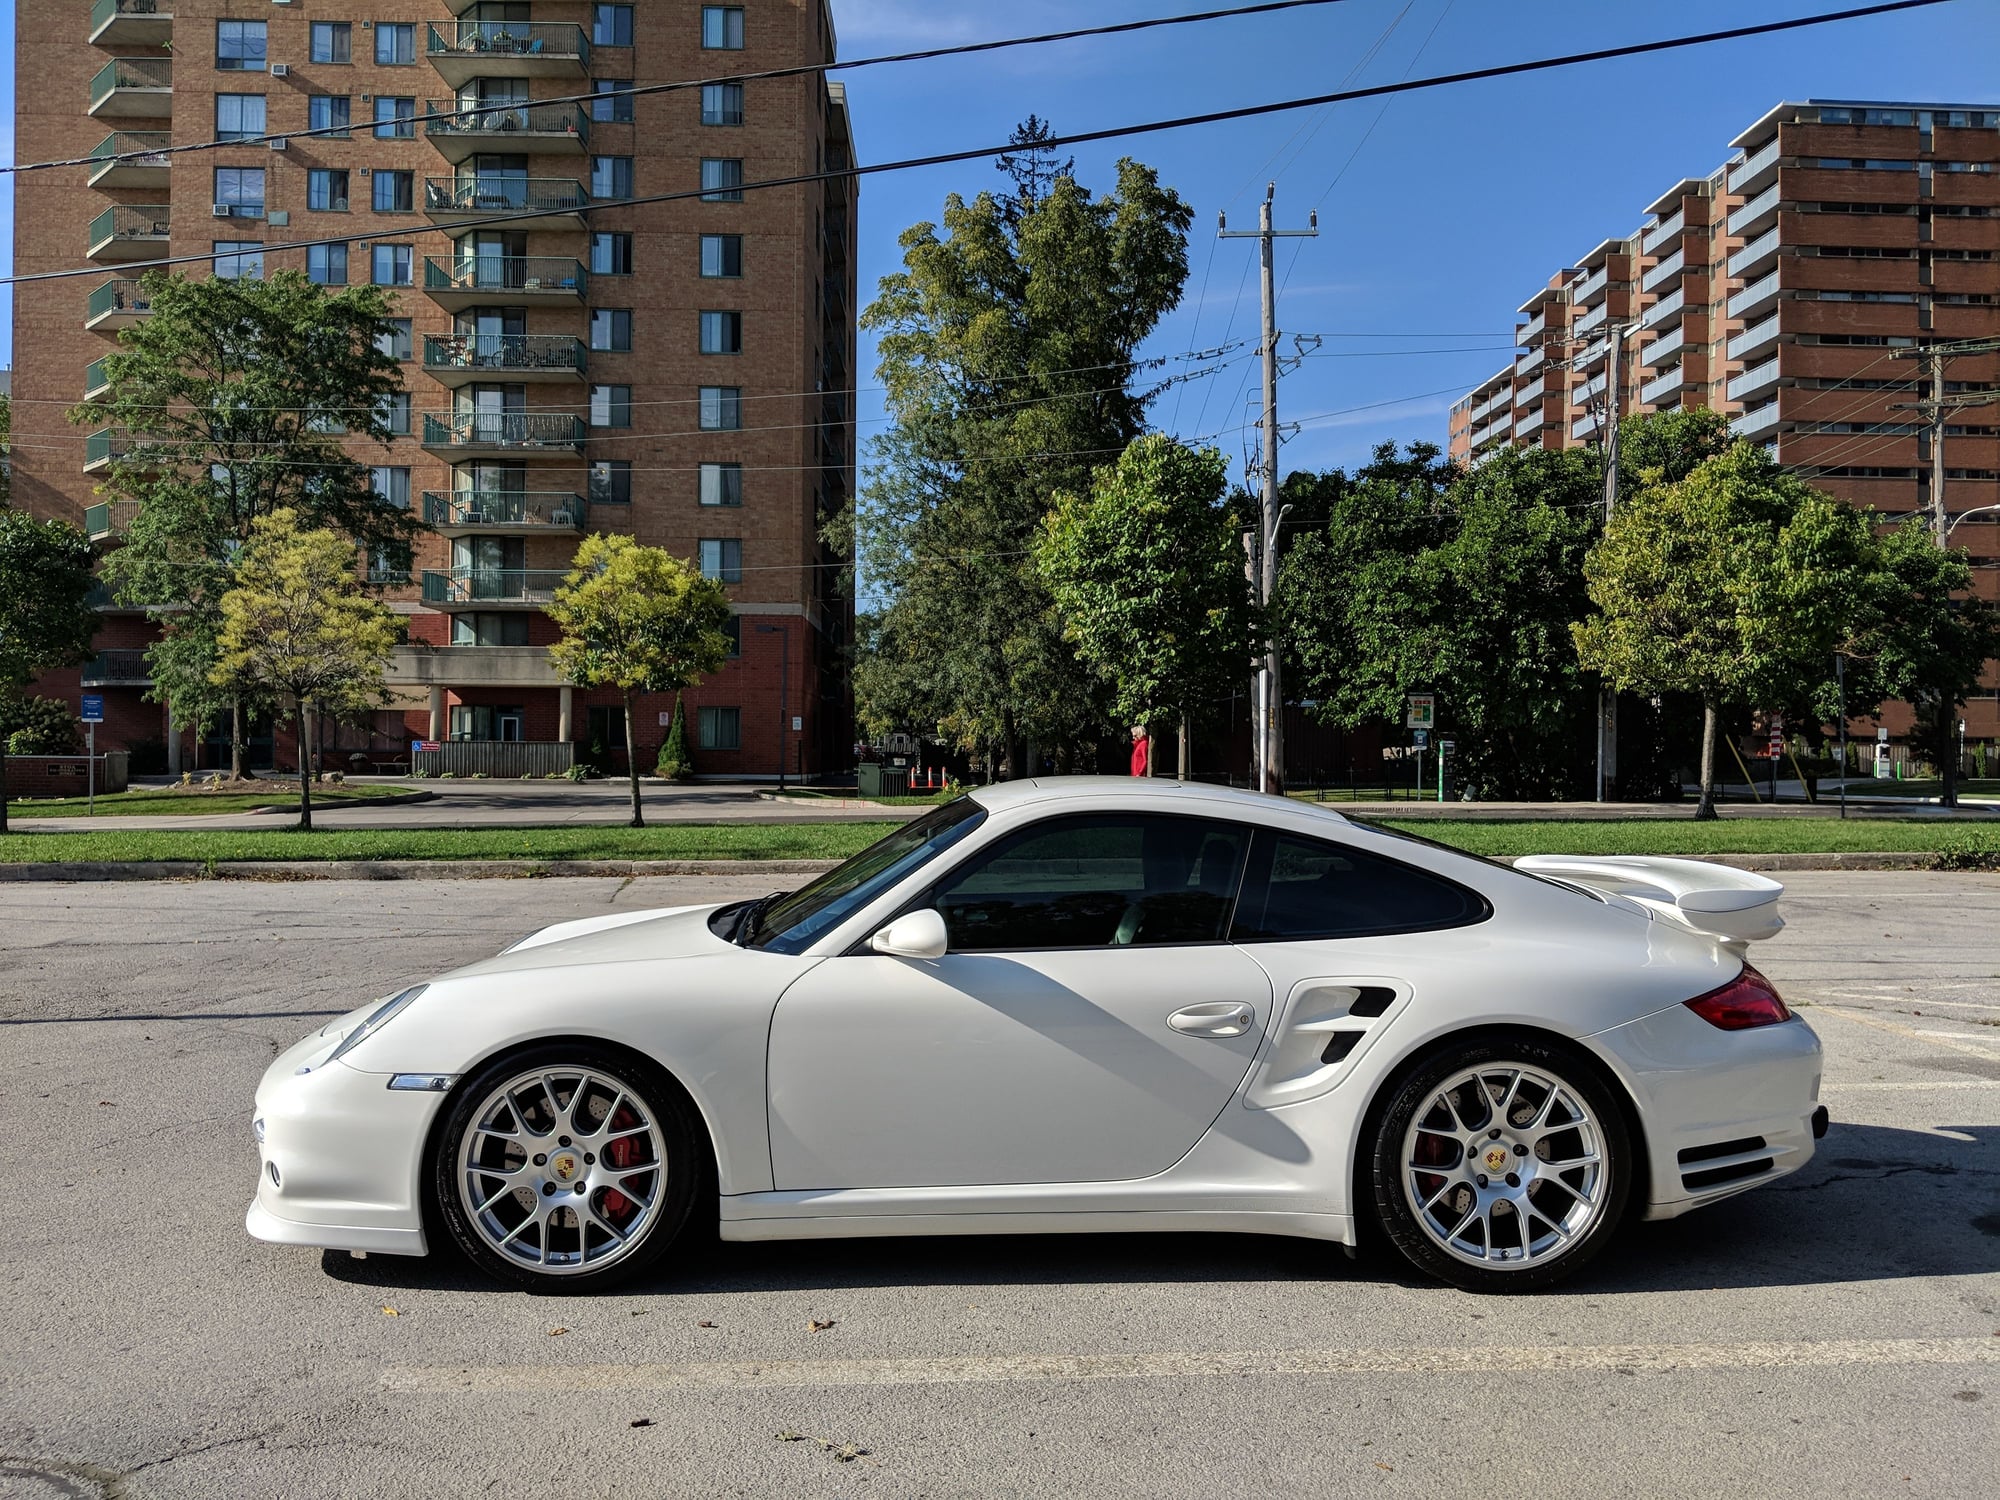 2008 Porsche 911 - 2008 911 Turbo 997TT - Manual, Coupe, Aerokit - Used - VIN WP0AD29948S784107 - 59,000 Miles - 6 cyl - 4WD - Manual - Coupe - White - Burlington, ON L7L4Y8, Canada